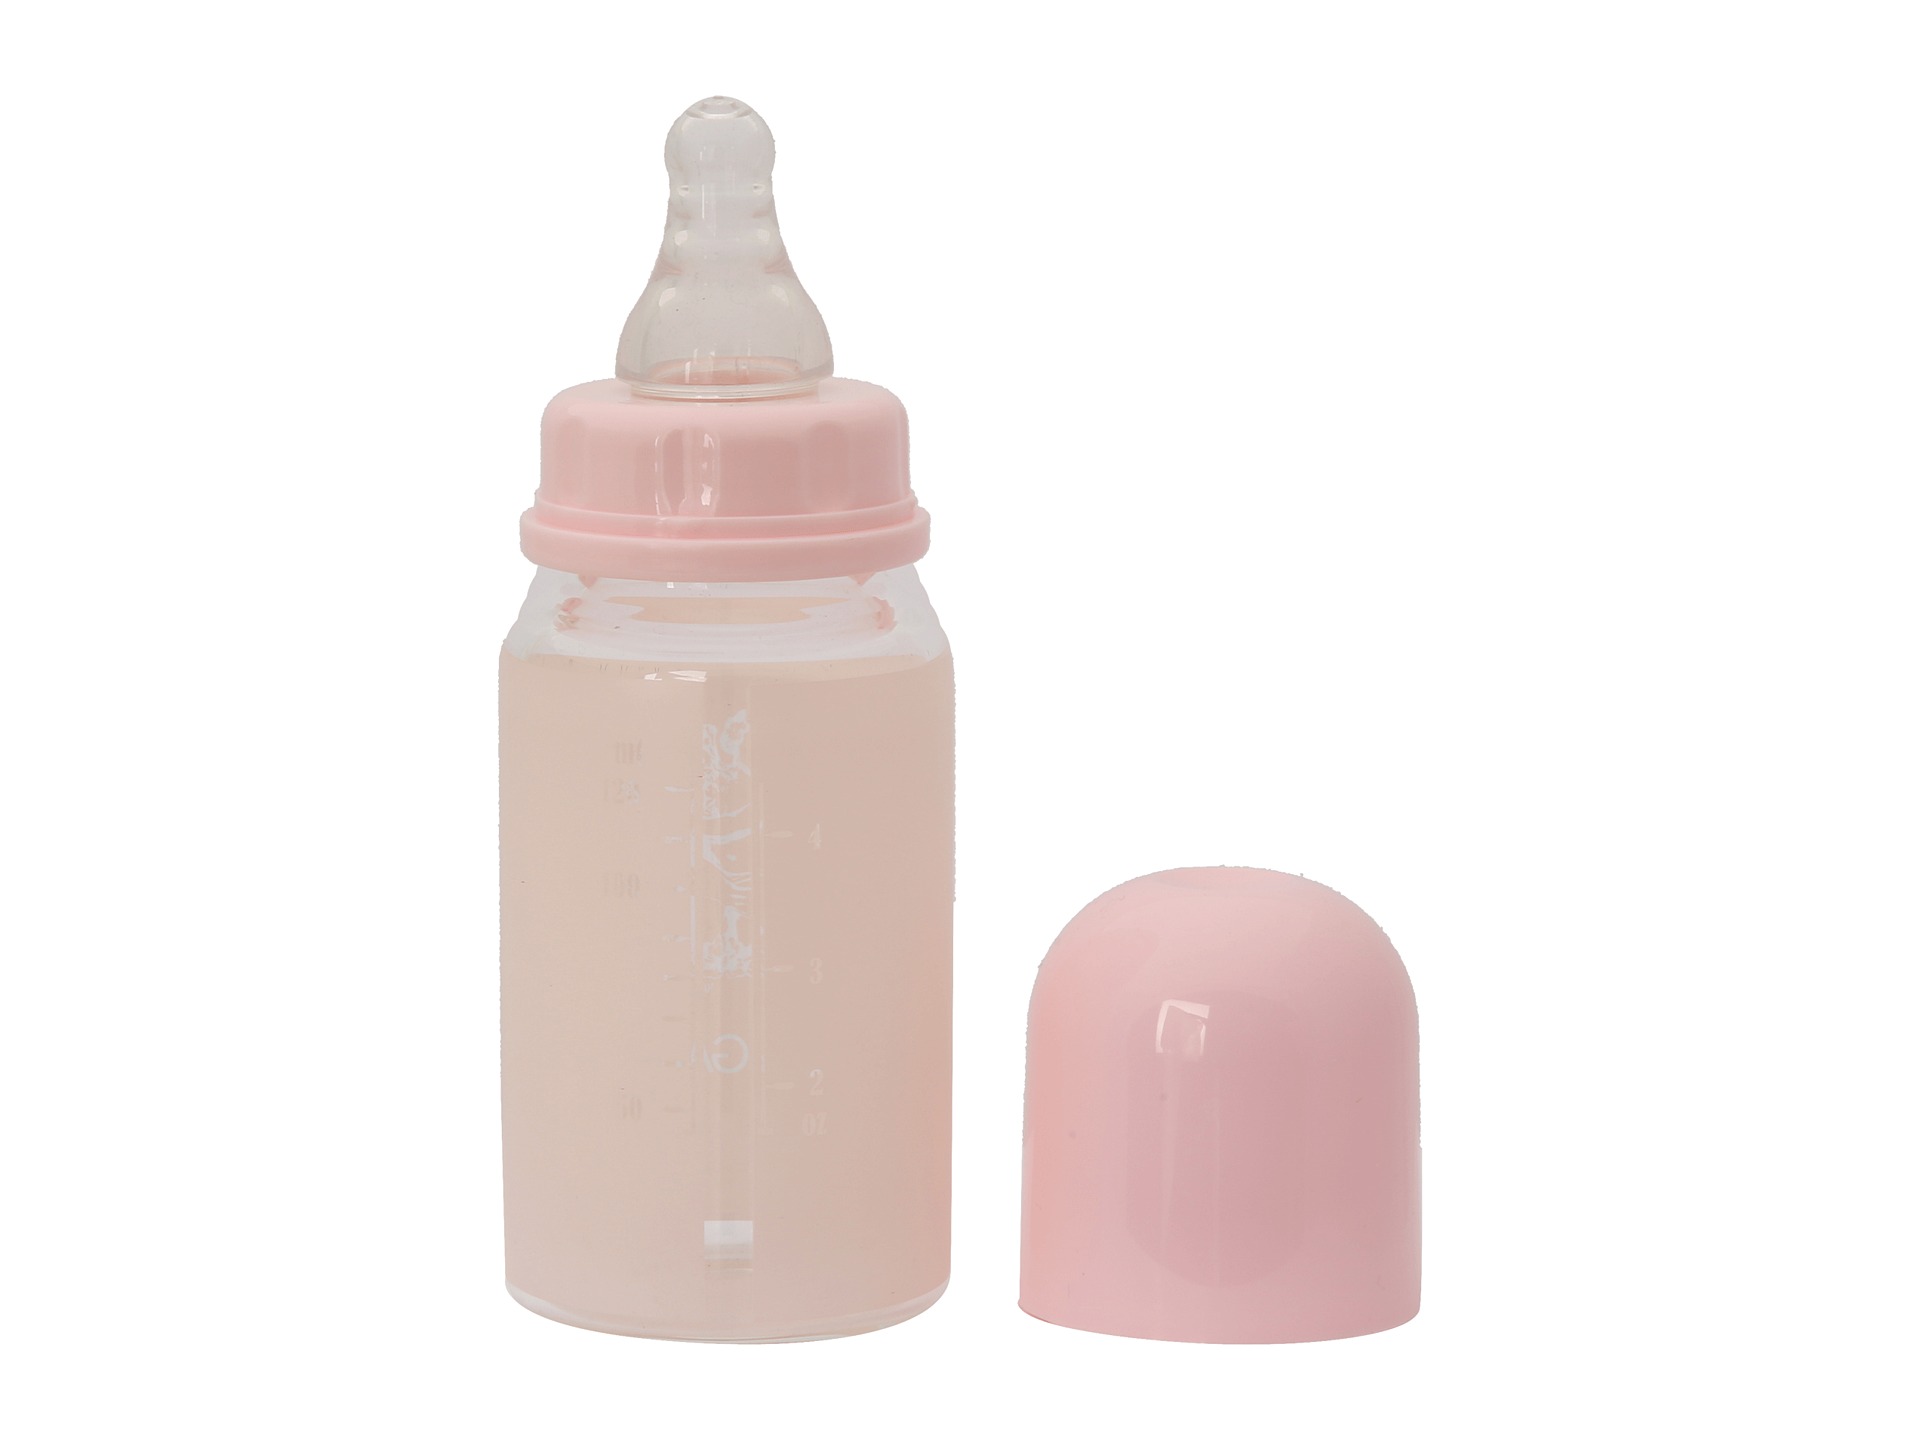 ... Glass Feeding Bottle Pacifier Gift Kit | Shipped Free at Zappos